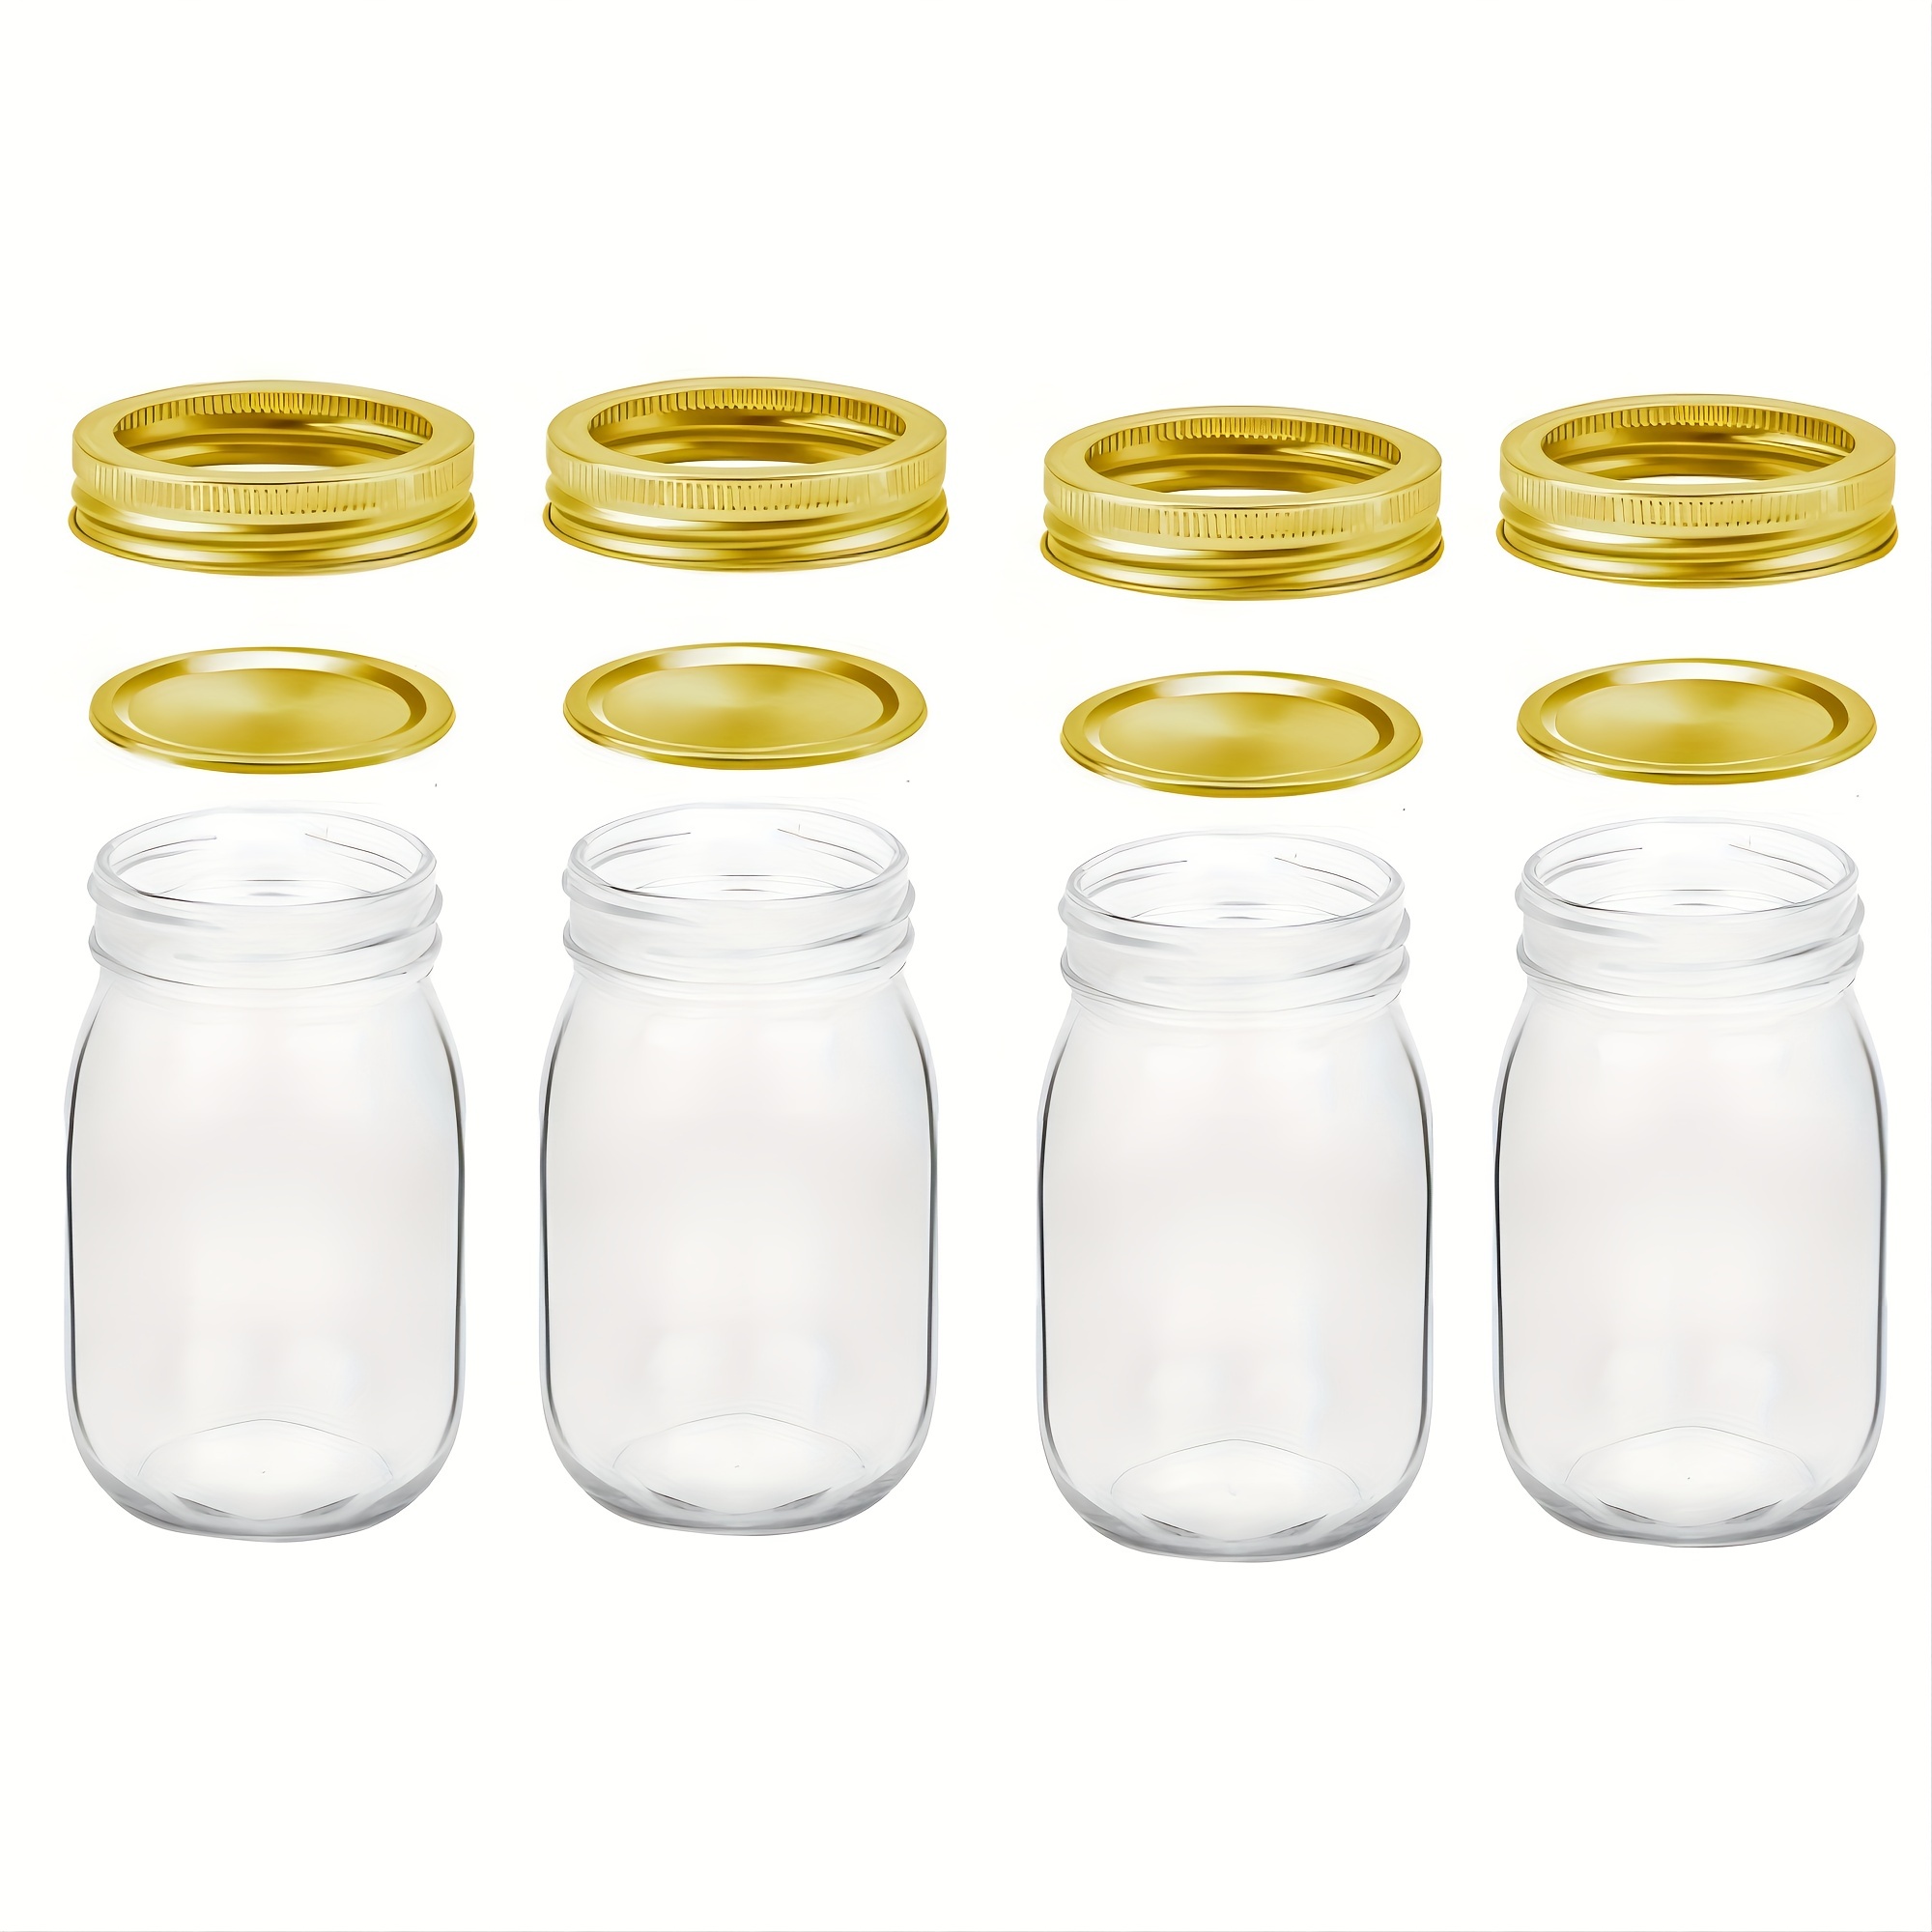 6 Oz Clear Hexagon Jars,Small Glass Jars with Lids(Golden),Mason Jars for  Herbs